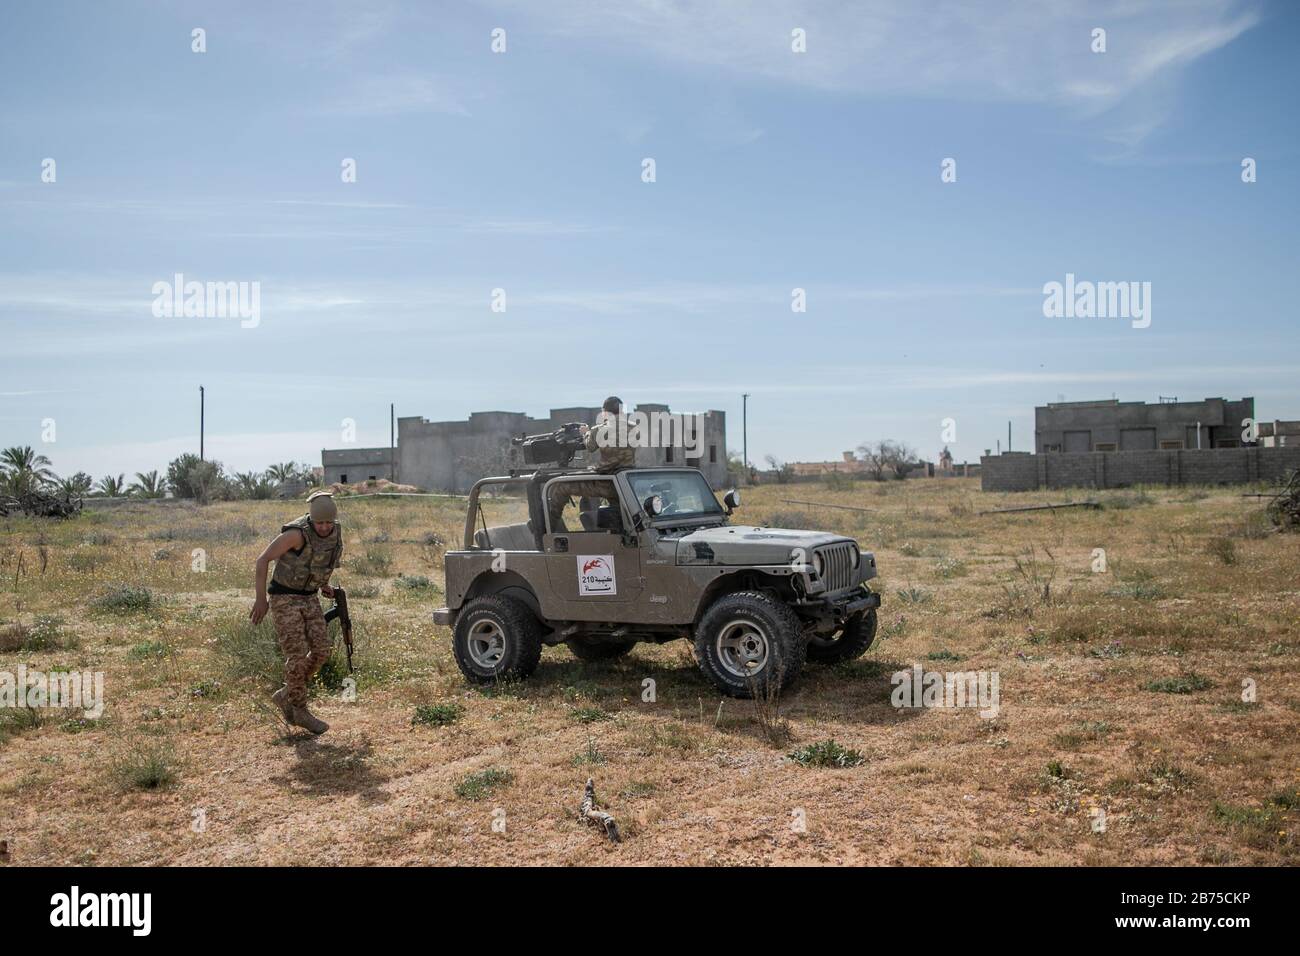 13 March 2020, Libya, Tripoli: A fighters of Libya's UN-backed Government of National Accord (GNA) of Fayez al-Sarraj, fires his truck-mounted heavy machine gun at the forces of the self-styled Libyan National Army (LNA) led by Libyan strongman Khalifa Haftar, at Ain Zara frontline, in the southern suburbs of capital Tripoli. Photo: Amru Salahuddien/dpa Stock Photo